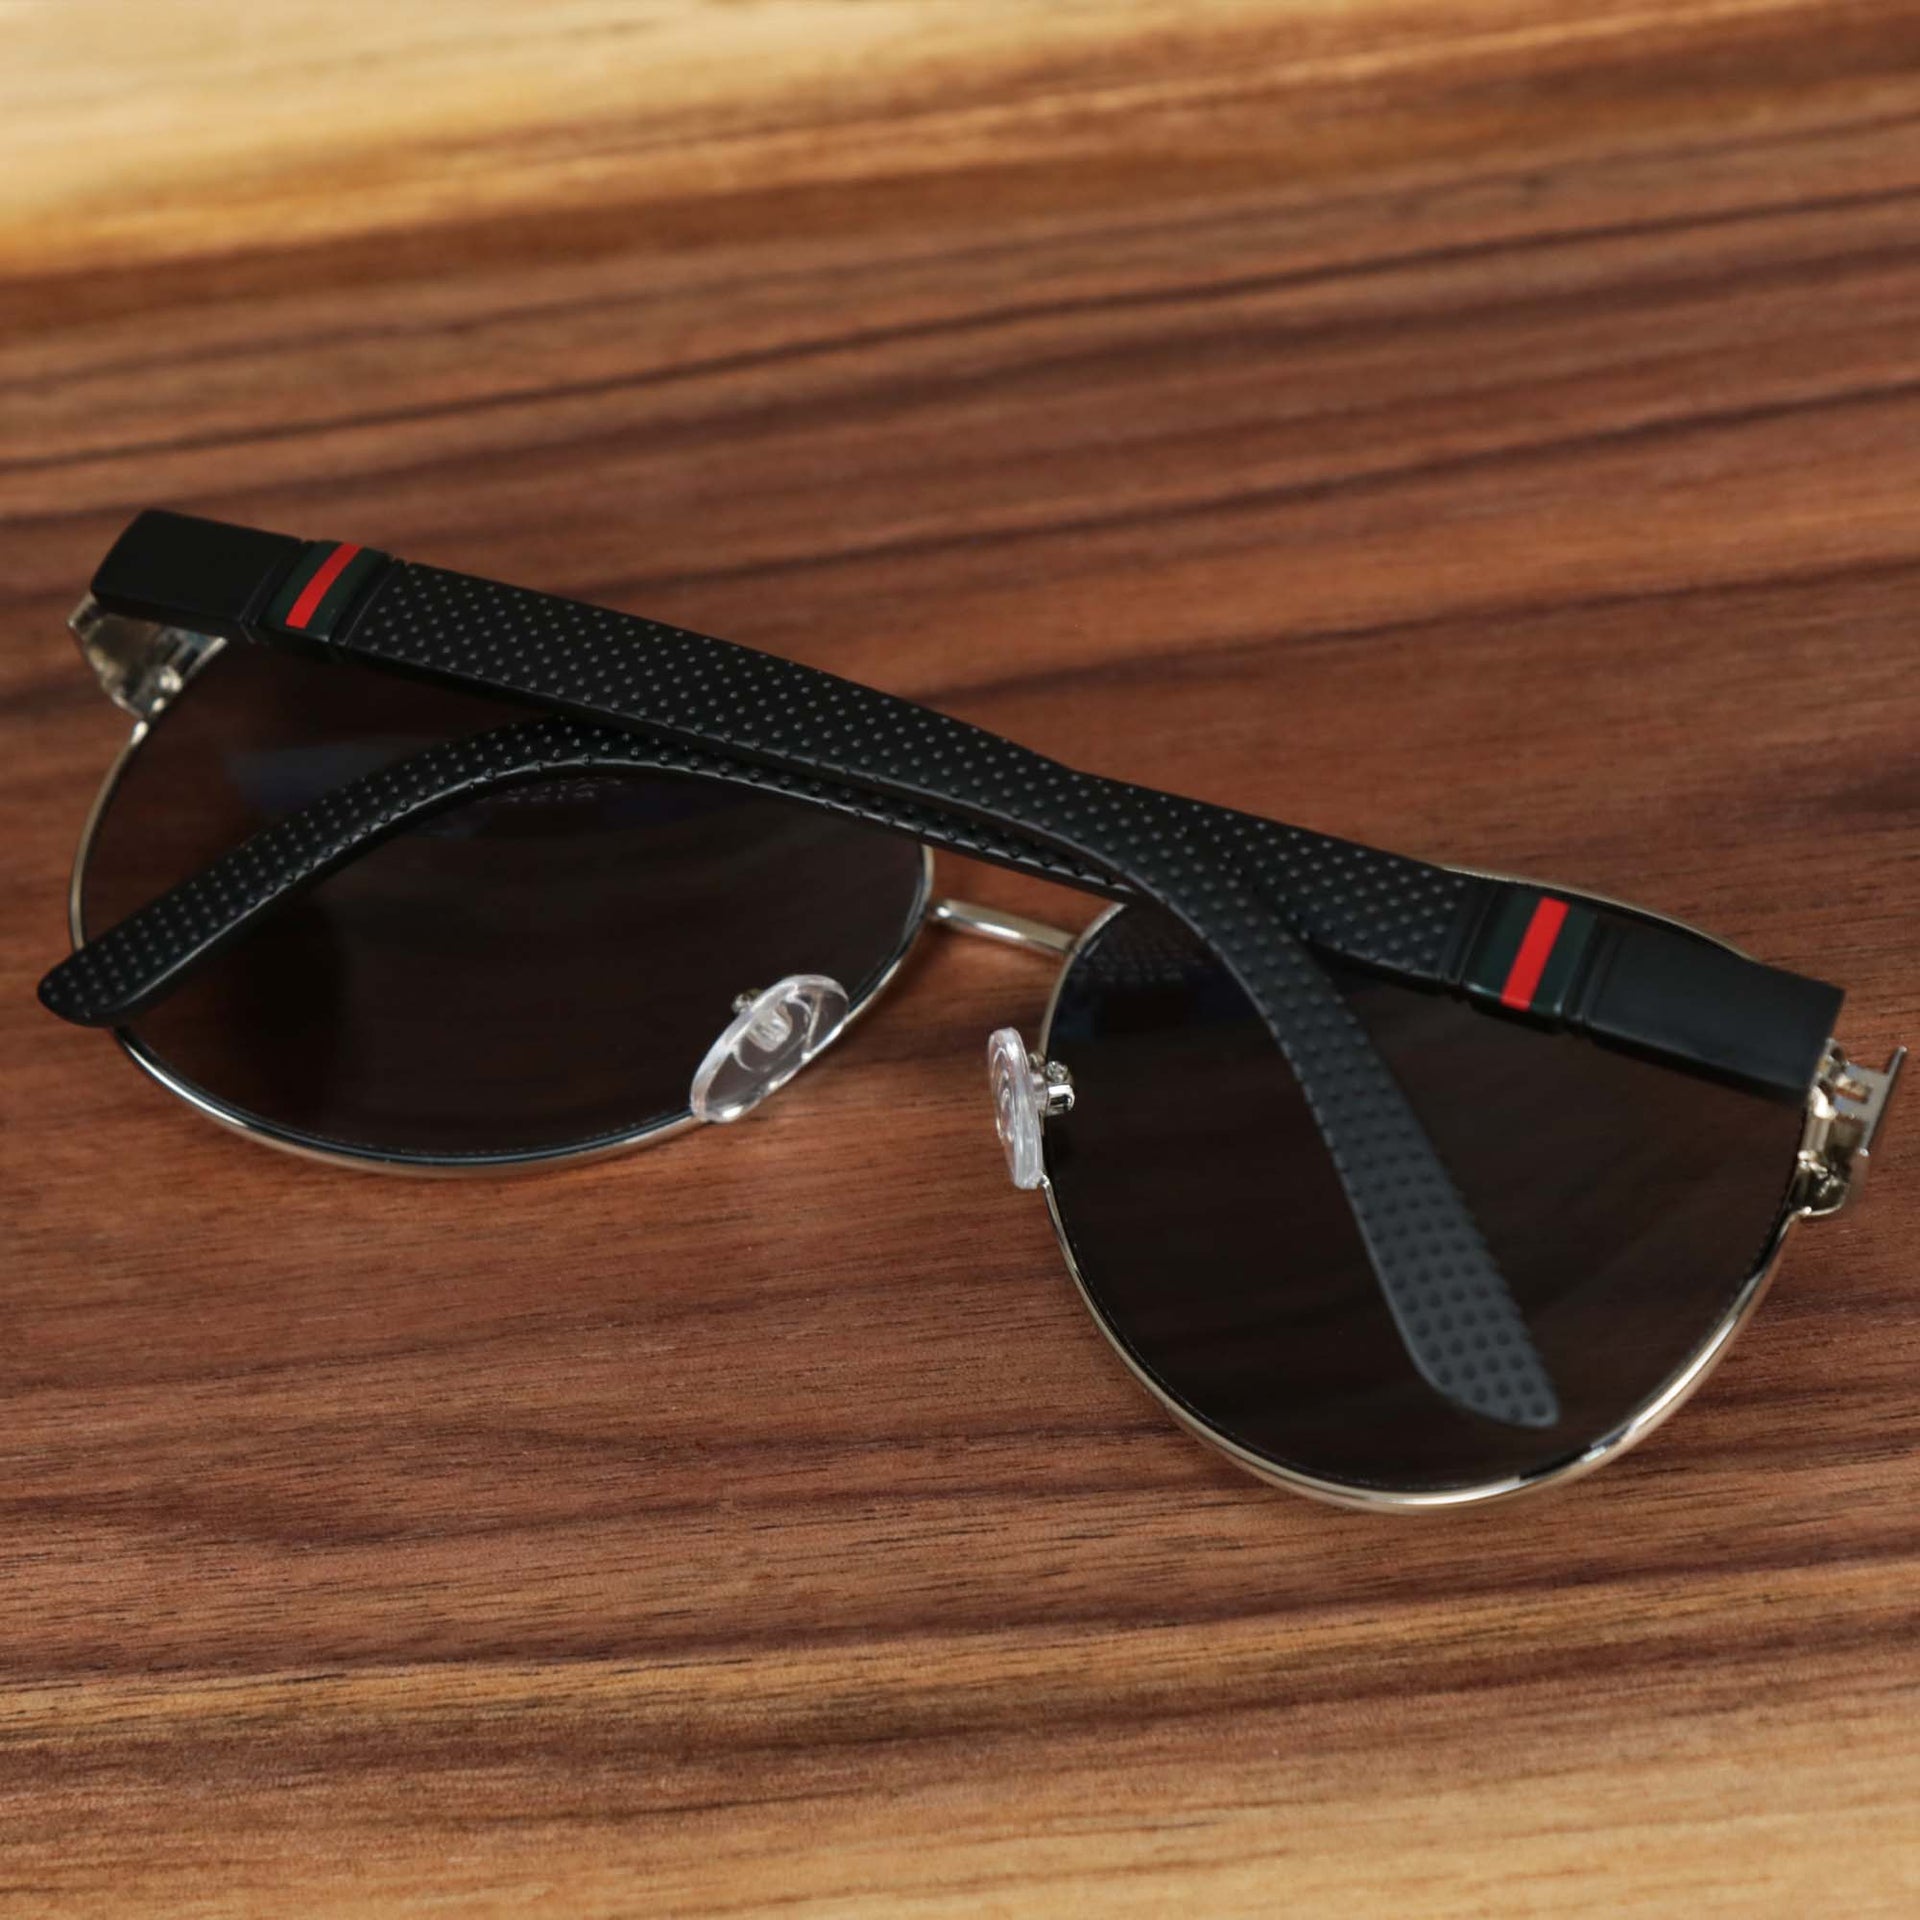 The Aviator Frame Racing Stripes Black Lens Sunglasses with Silver Frame folded up